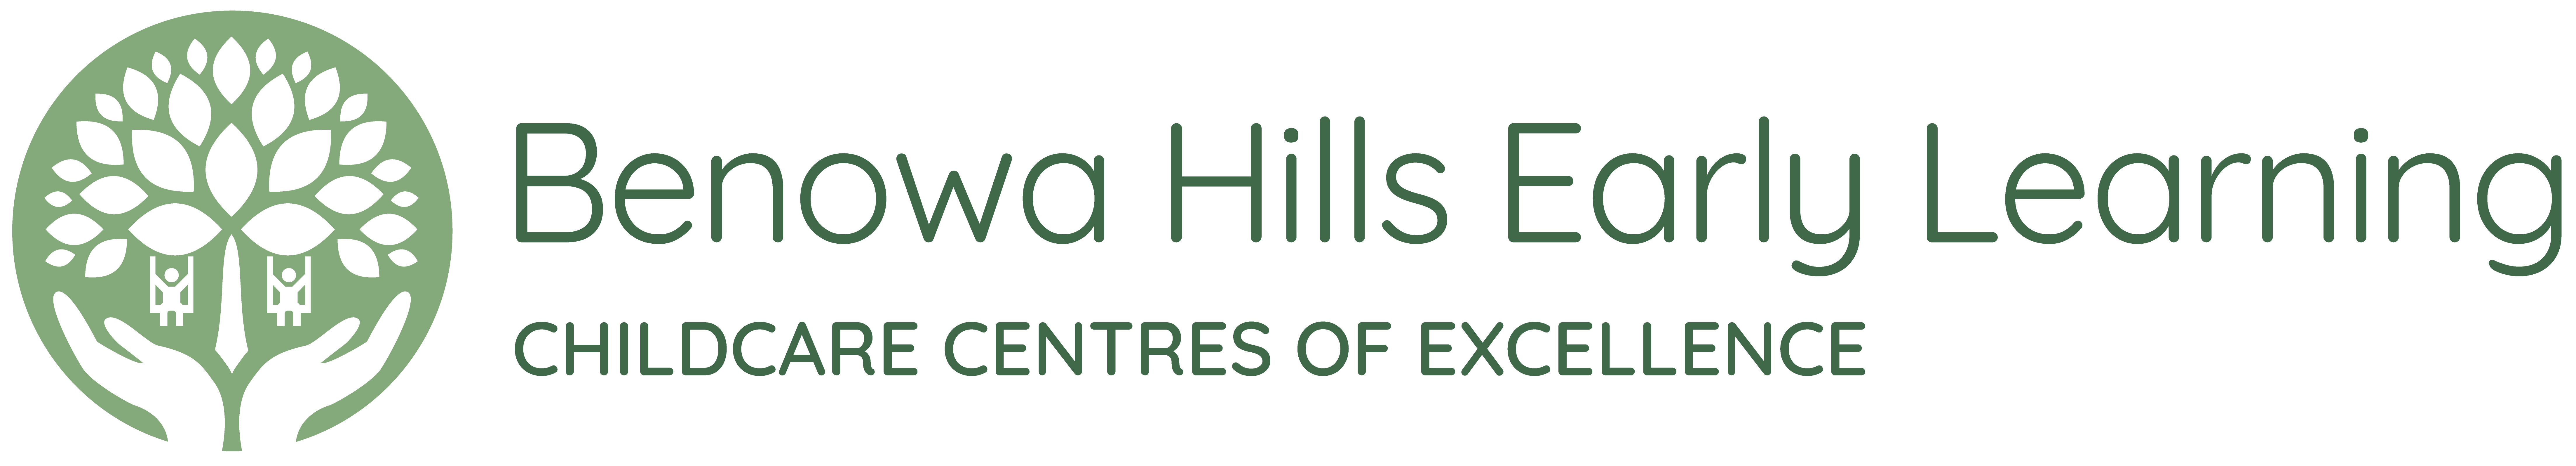 Benowa Hills Early Learning - Childcare Centre Gold Coast logo